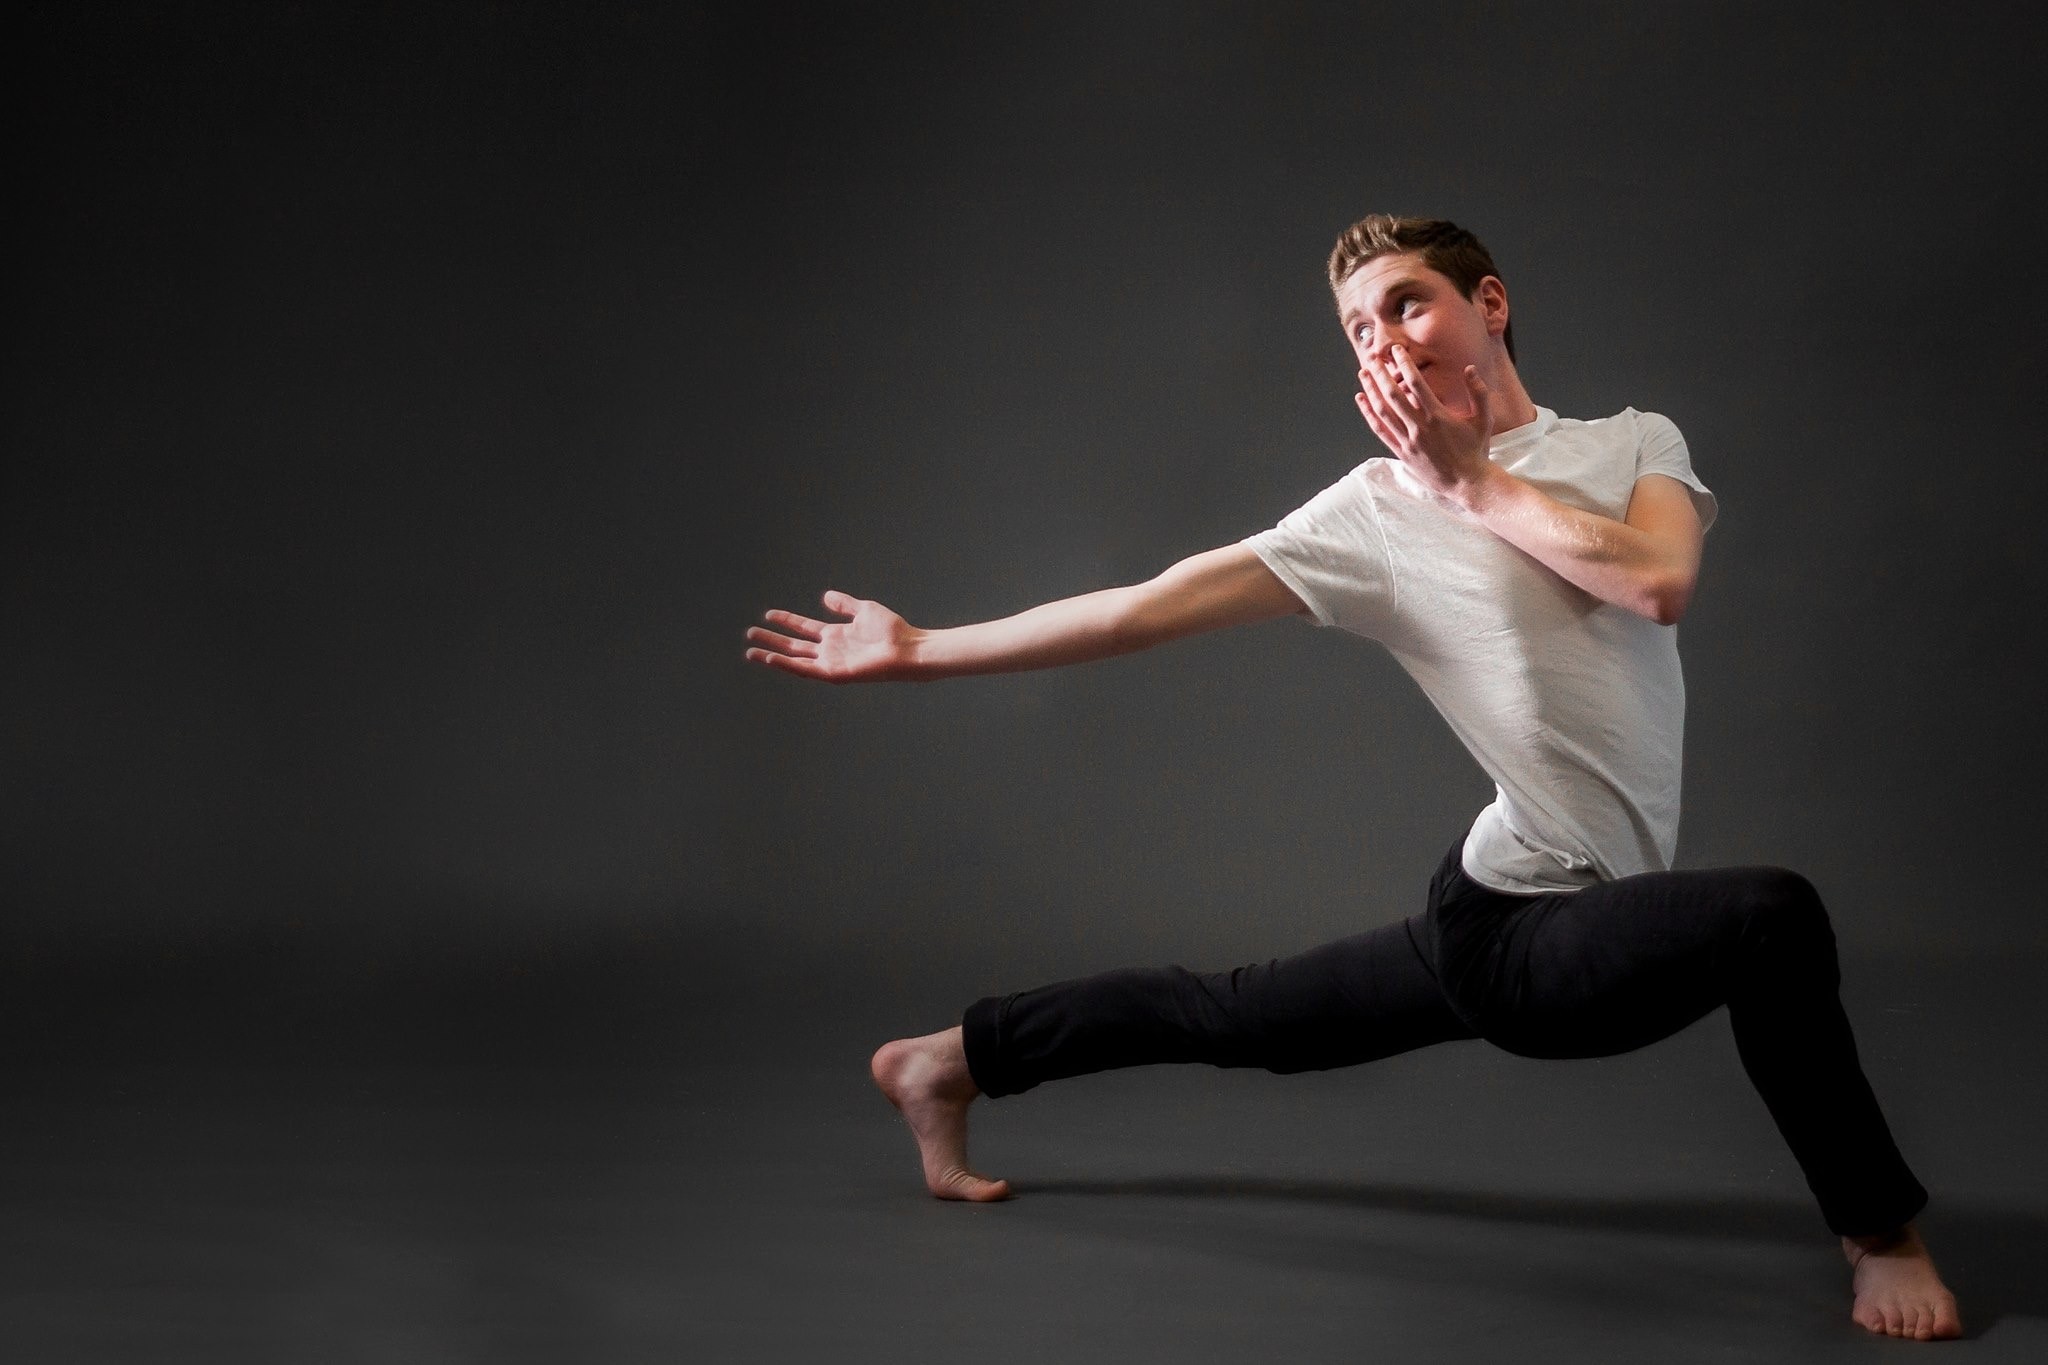 Jared Stern, of Seaford, studies dance at the Long Island High School for the Arts.